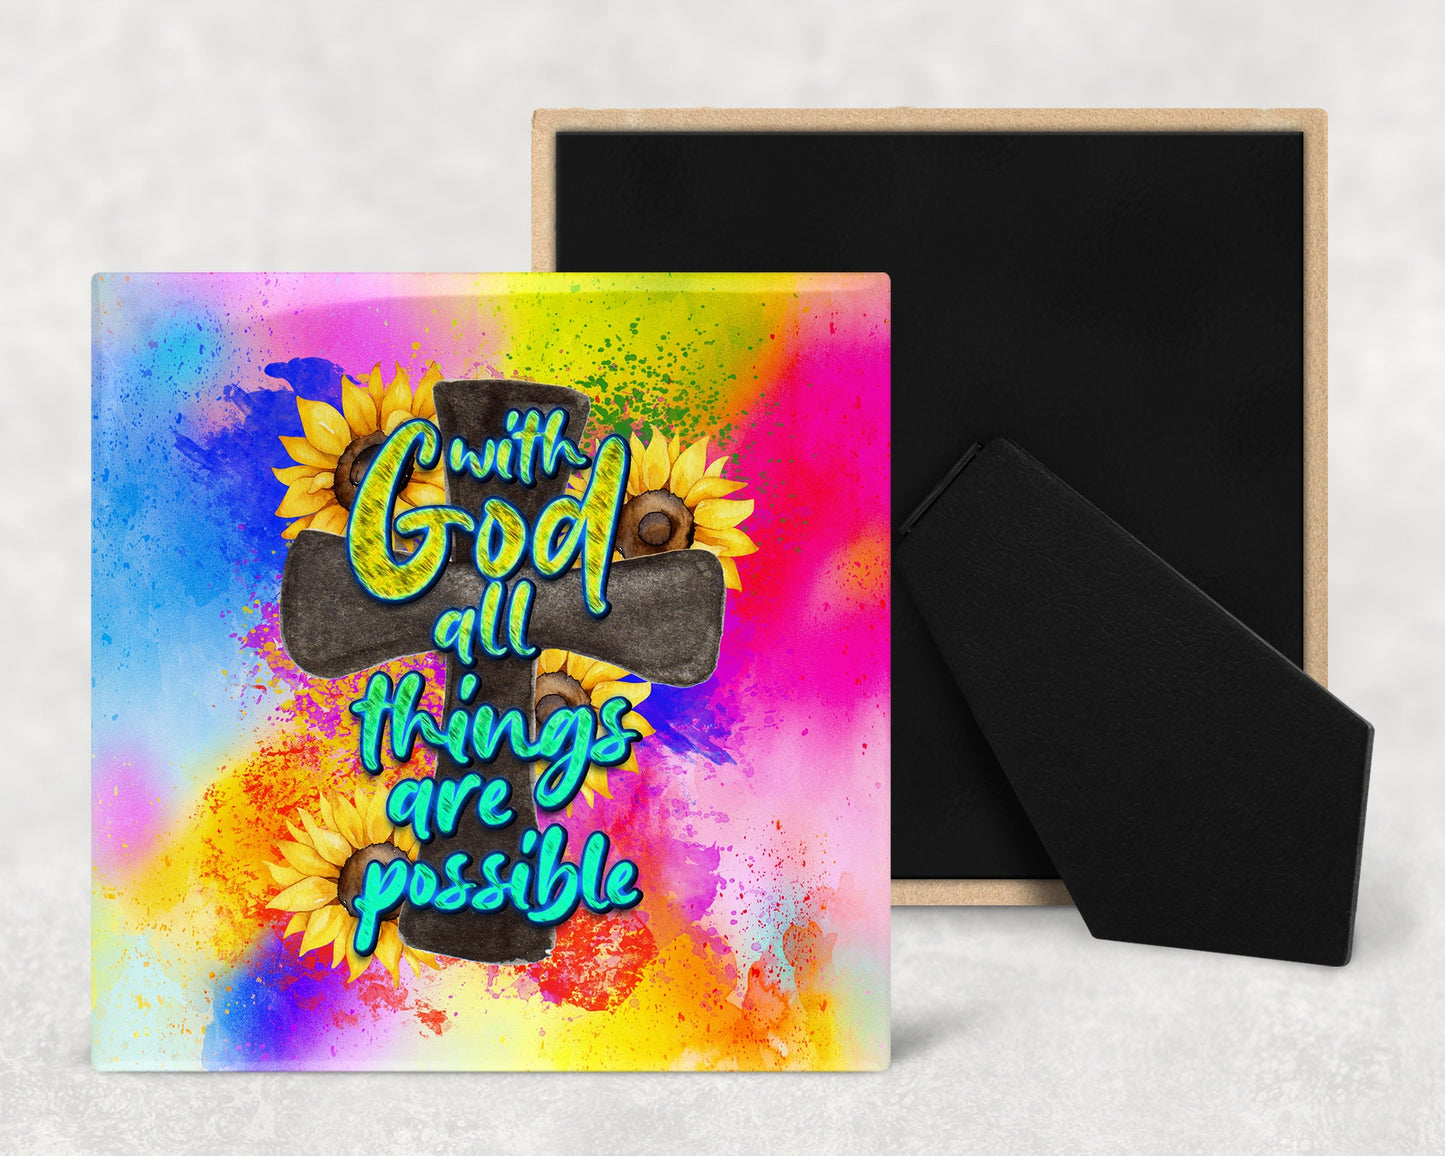 With God All Things are Possible Christian Cross Decorative Ceramic Tile with Optional Easel Back - Available in 3 Sizes